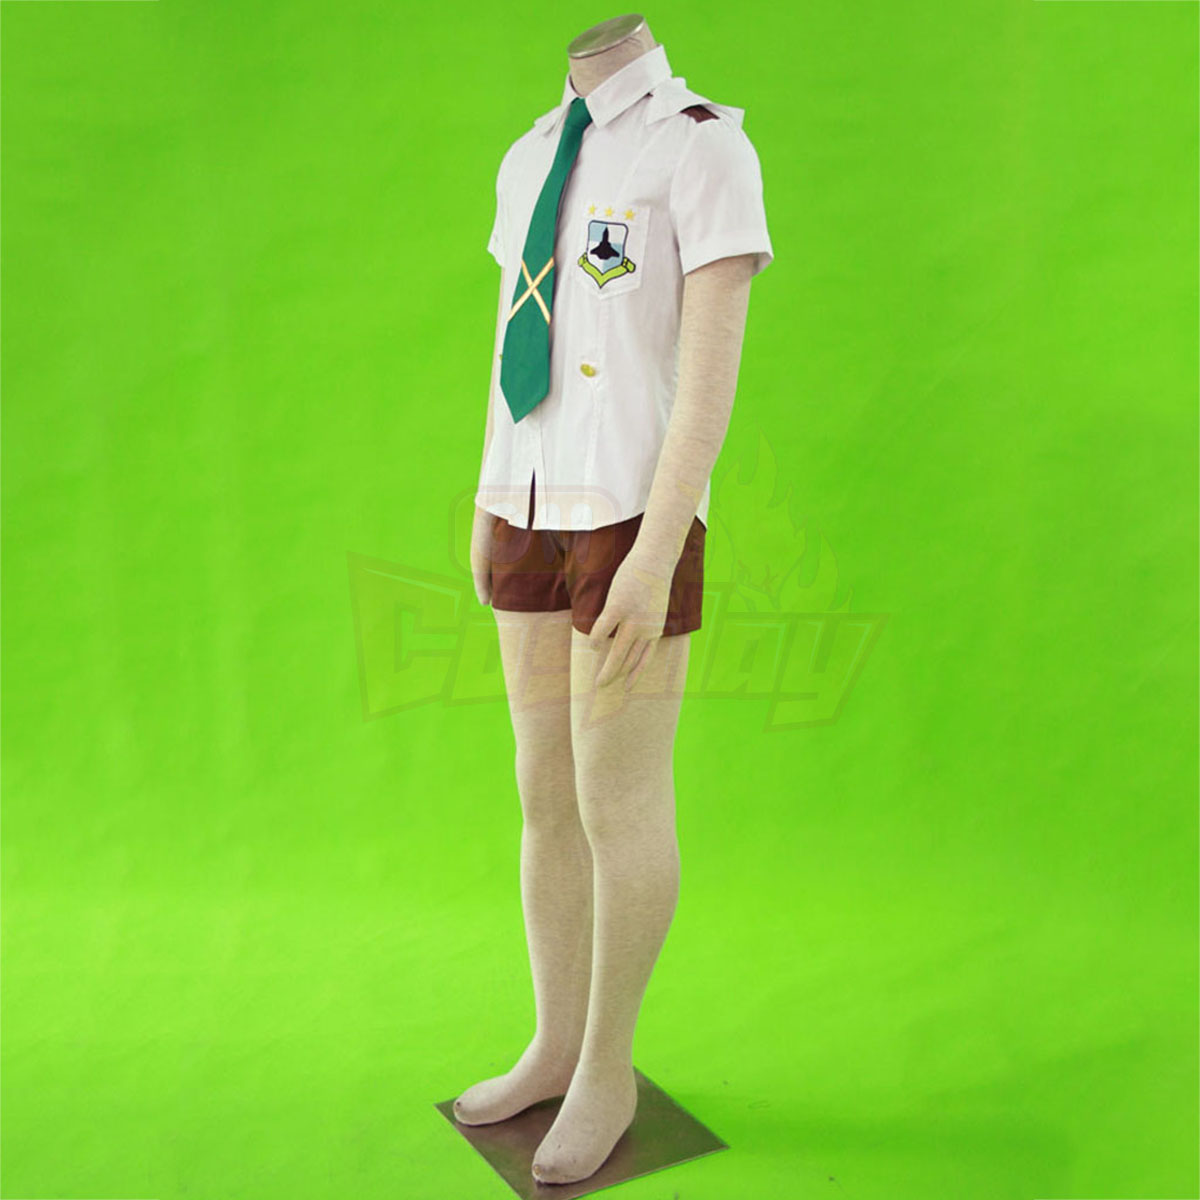 Macross F Luca Angelloni 1ST Cosplay Costumes Deluxe Edition